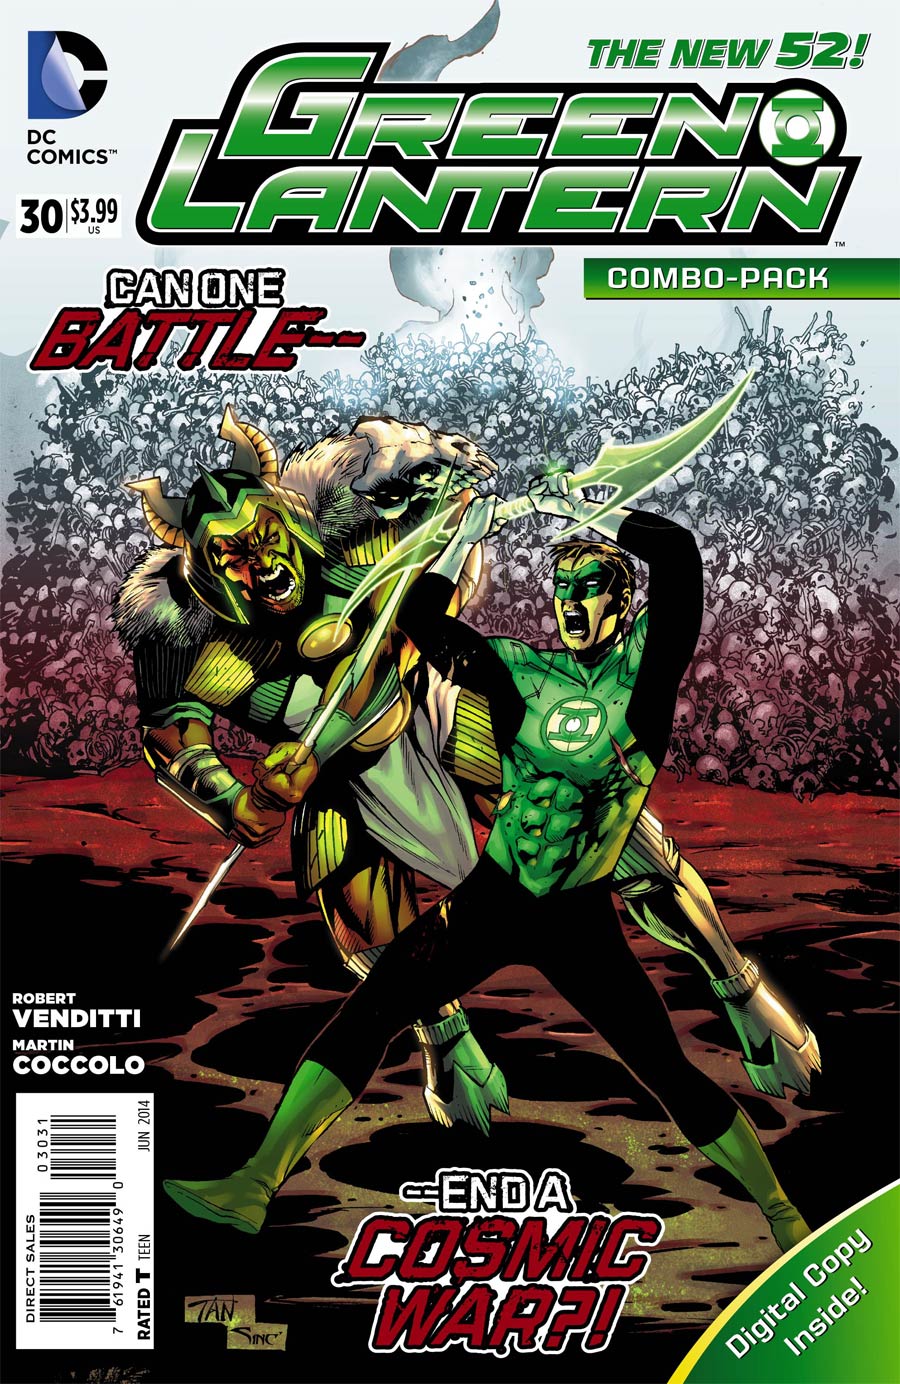 Green Lantern Vol 5 #30 Cover C Combo Pack Without Polybag